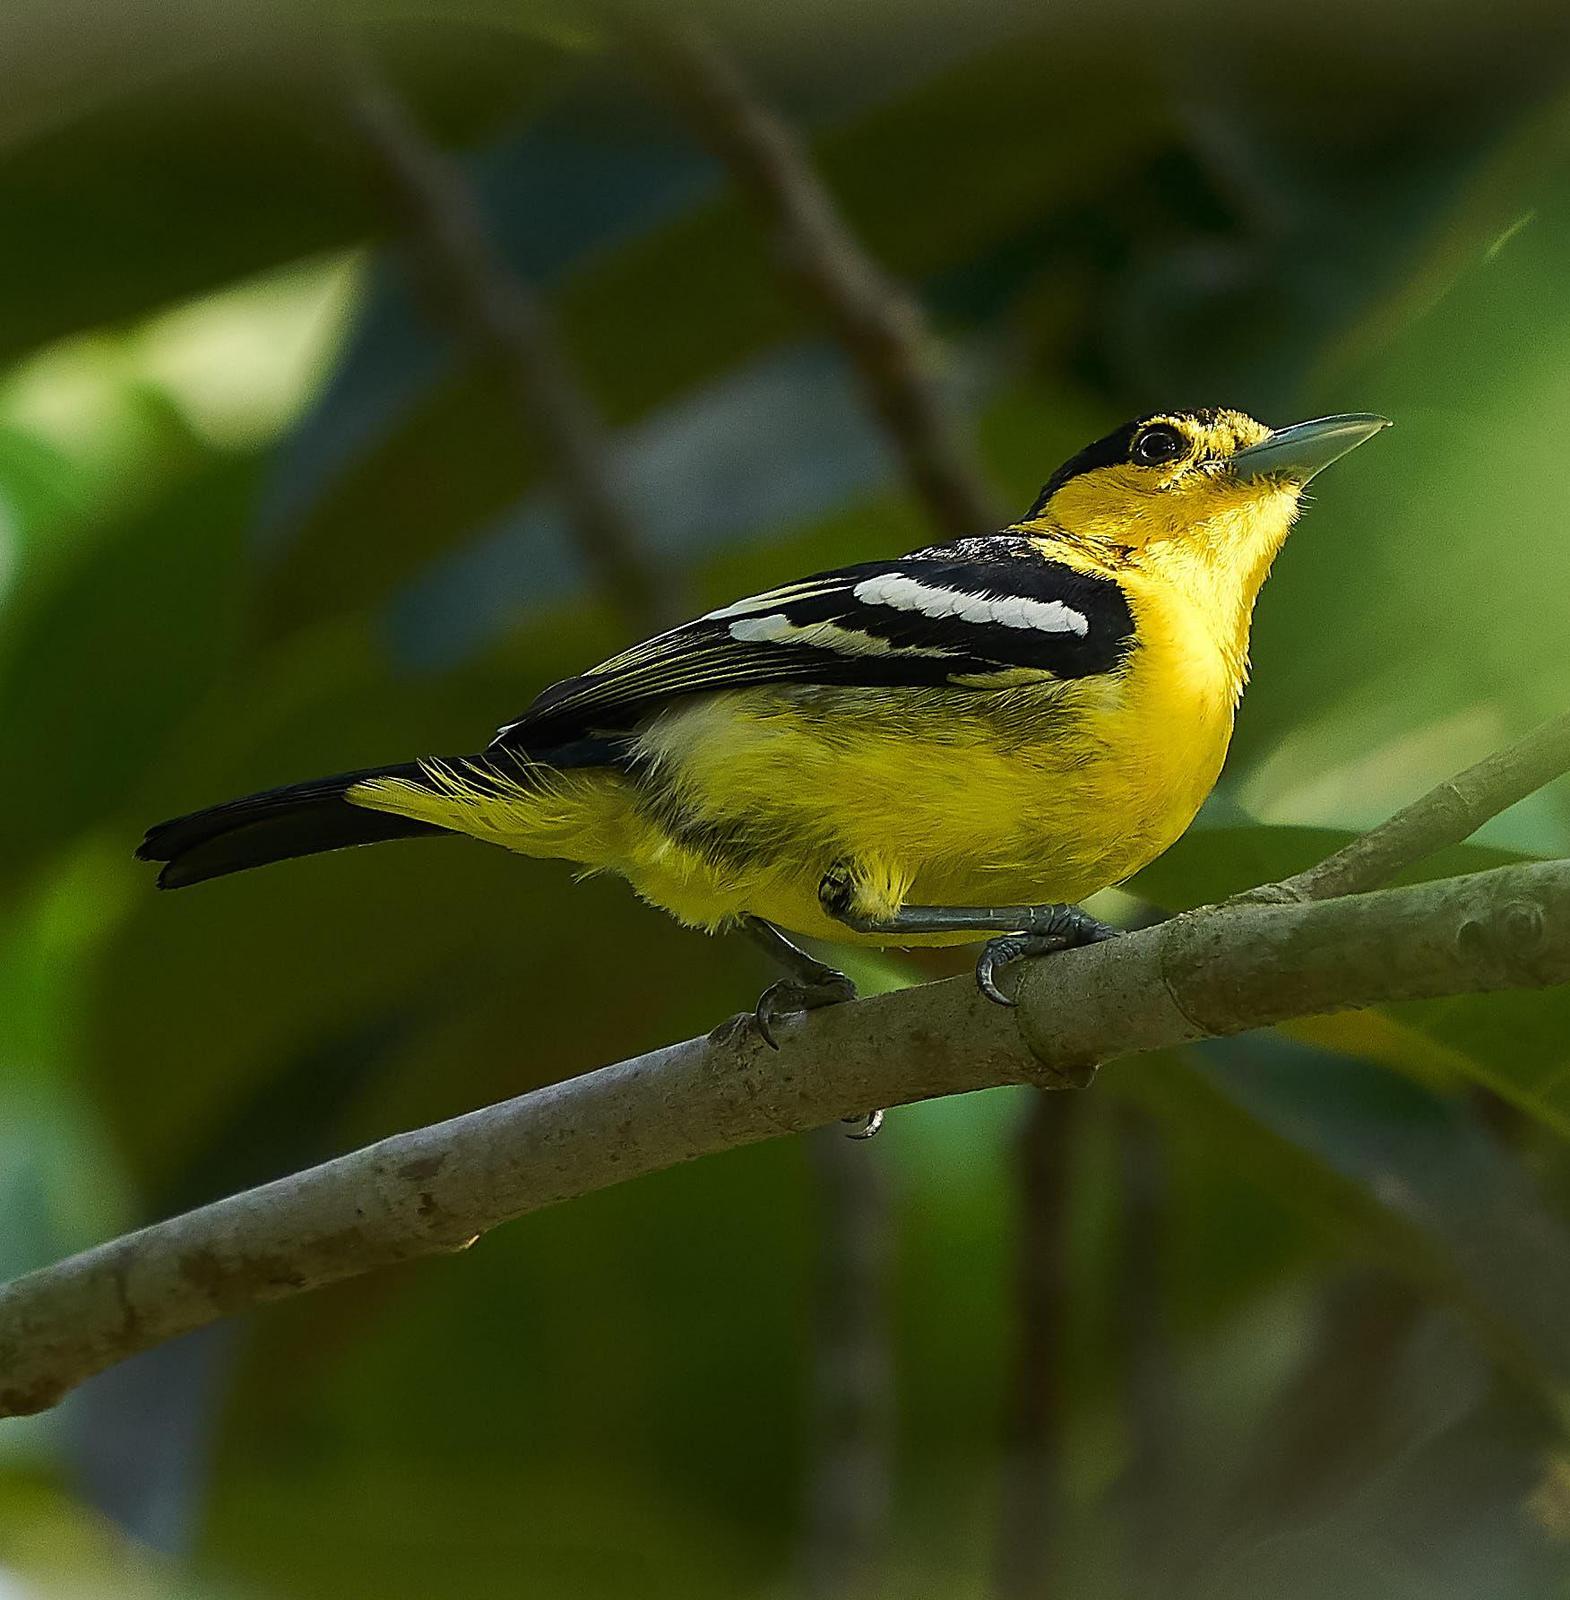 Common Iora Photo by Steven Cheong